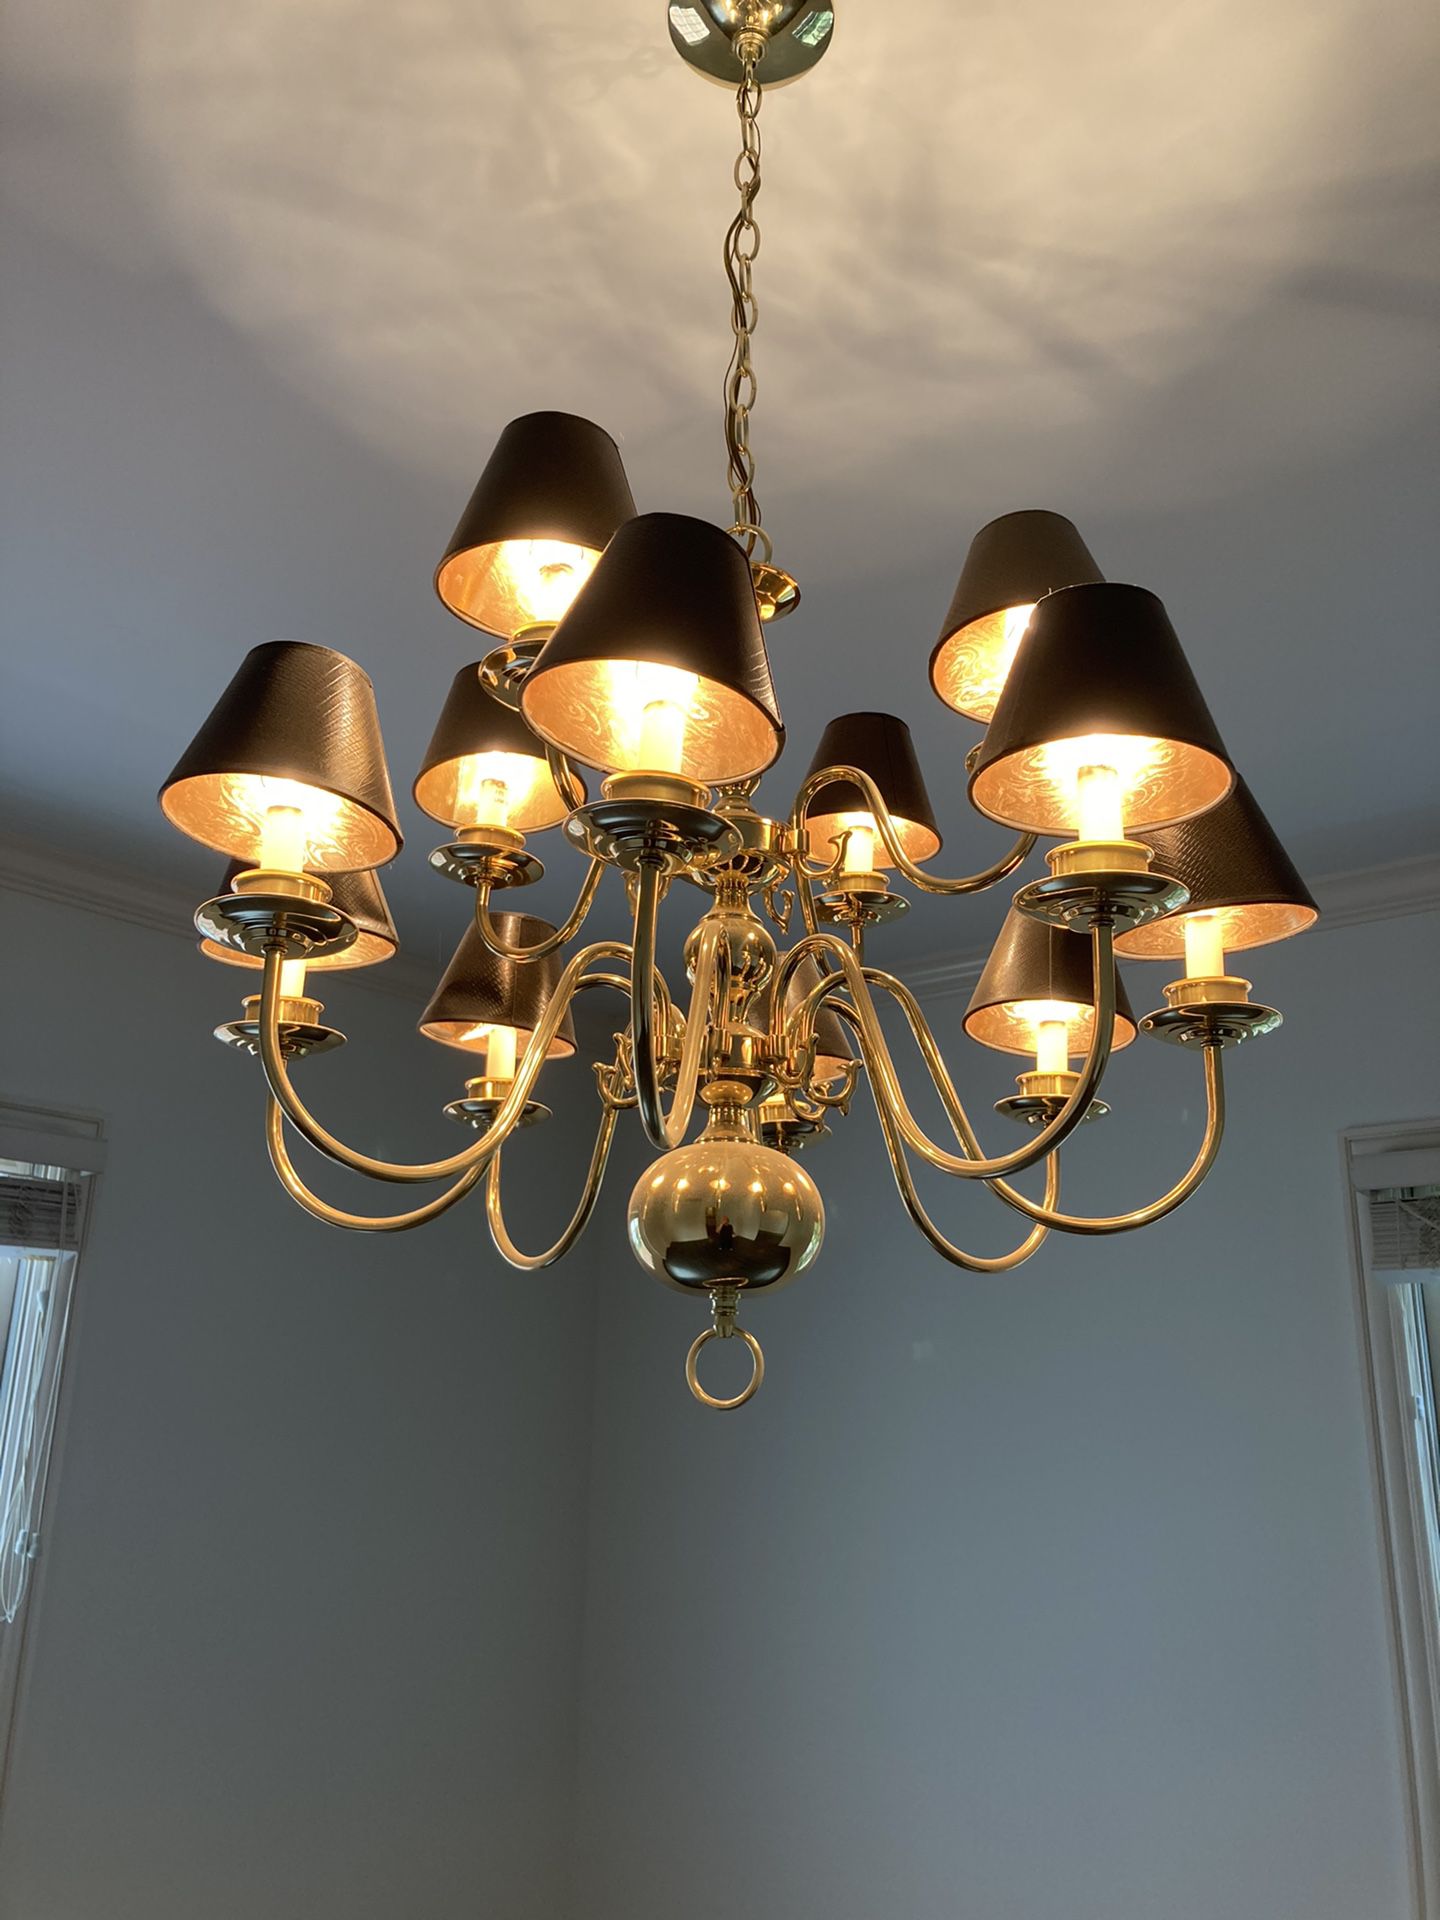 Large Traditional Chandelier - 12 arms